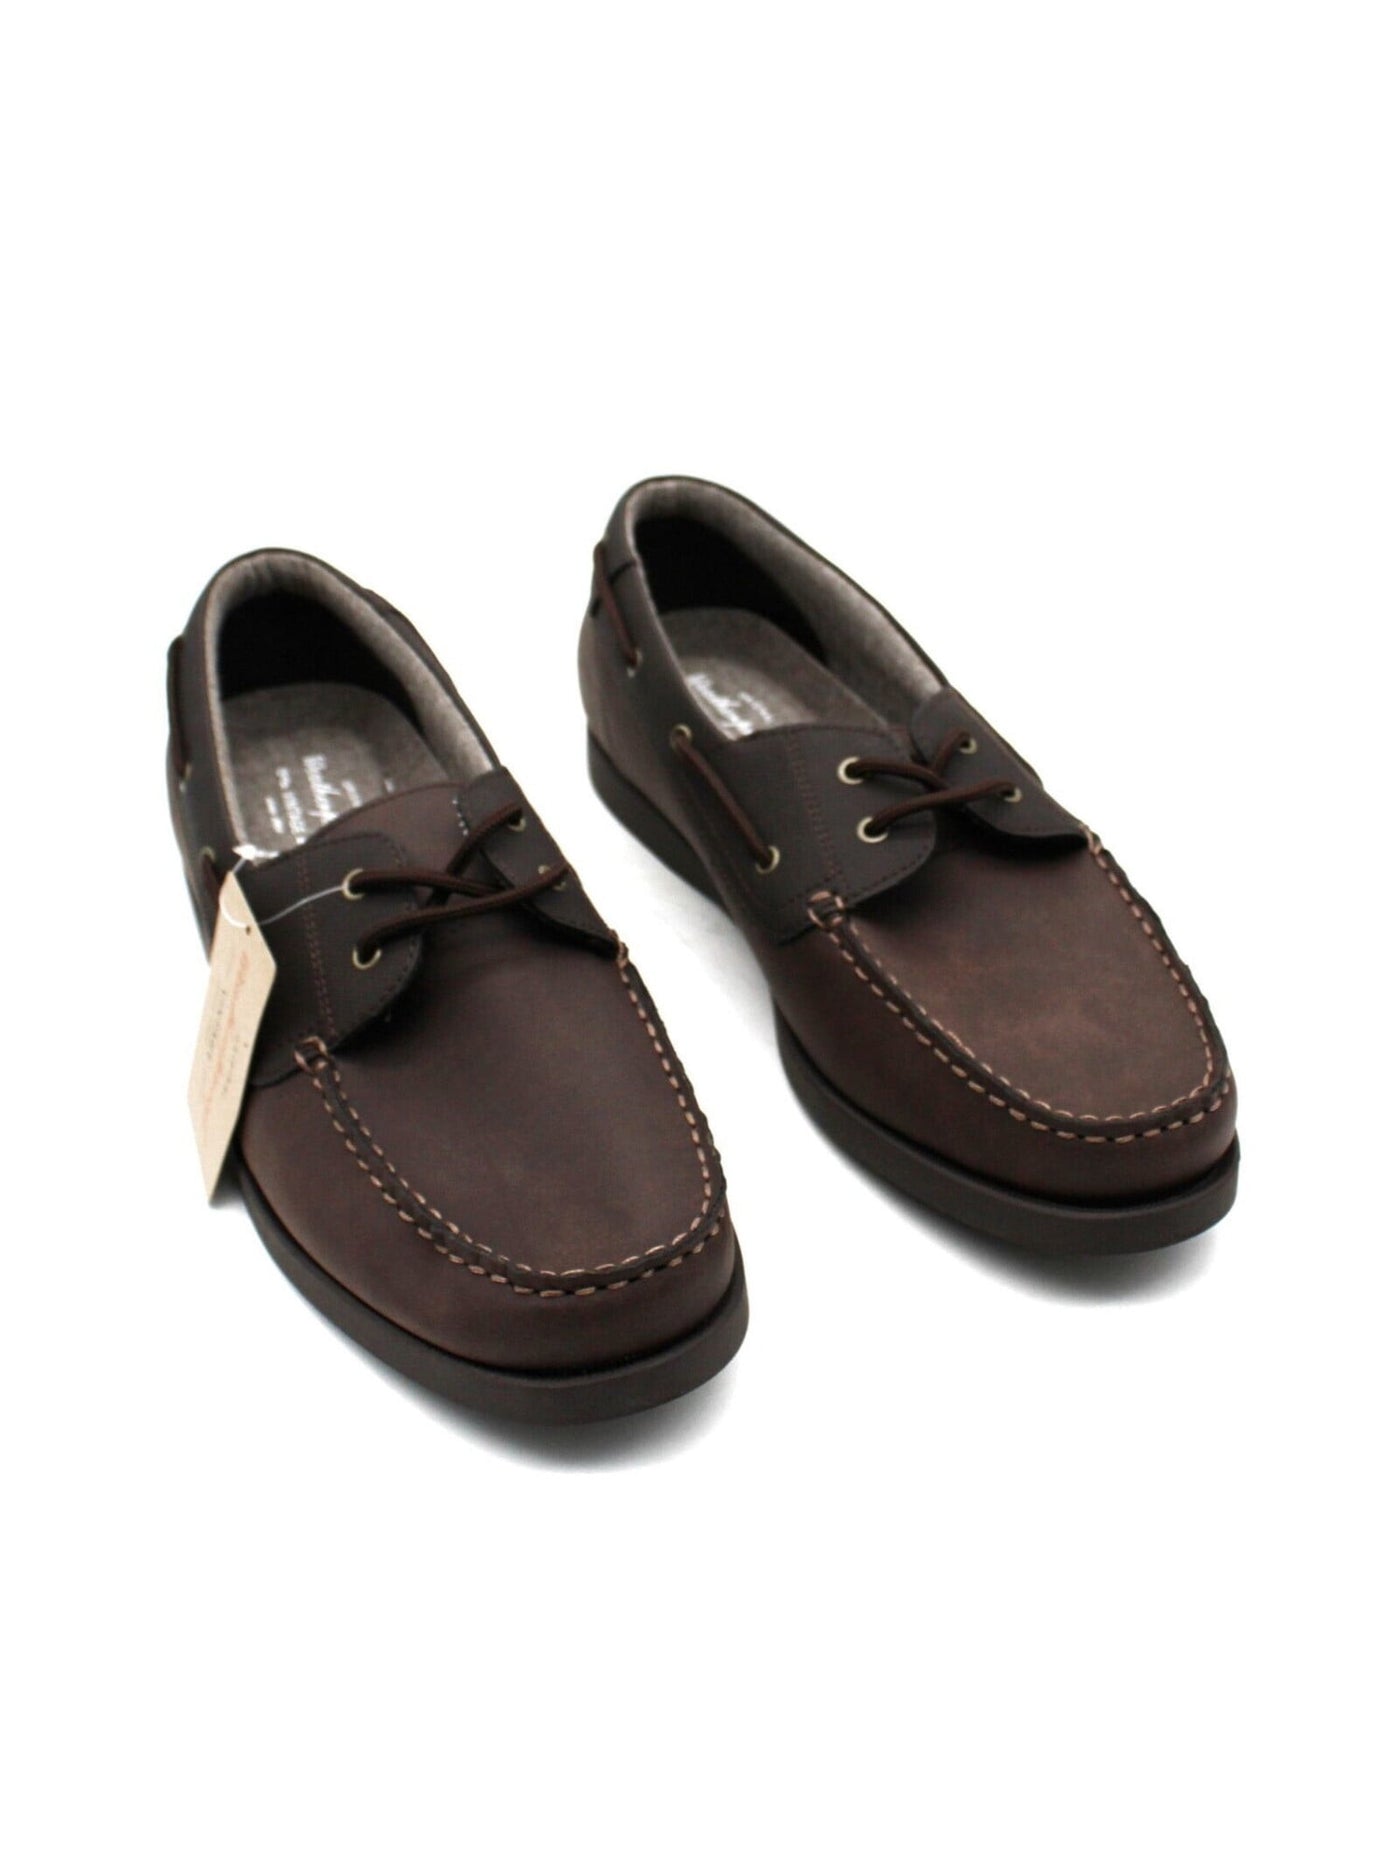 WEATHERPROOF VINTAGE Mens Brown Cushioned Benny Round Toe Lace-Up Boat Shoes 12 M